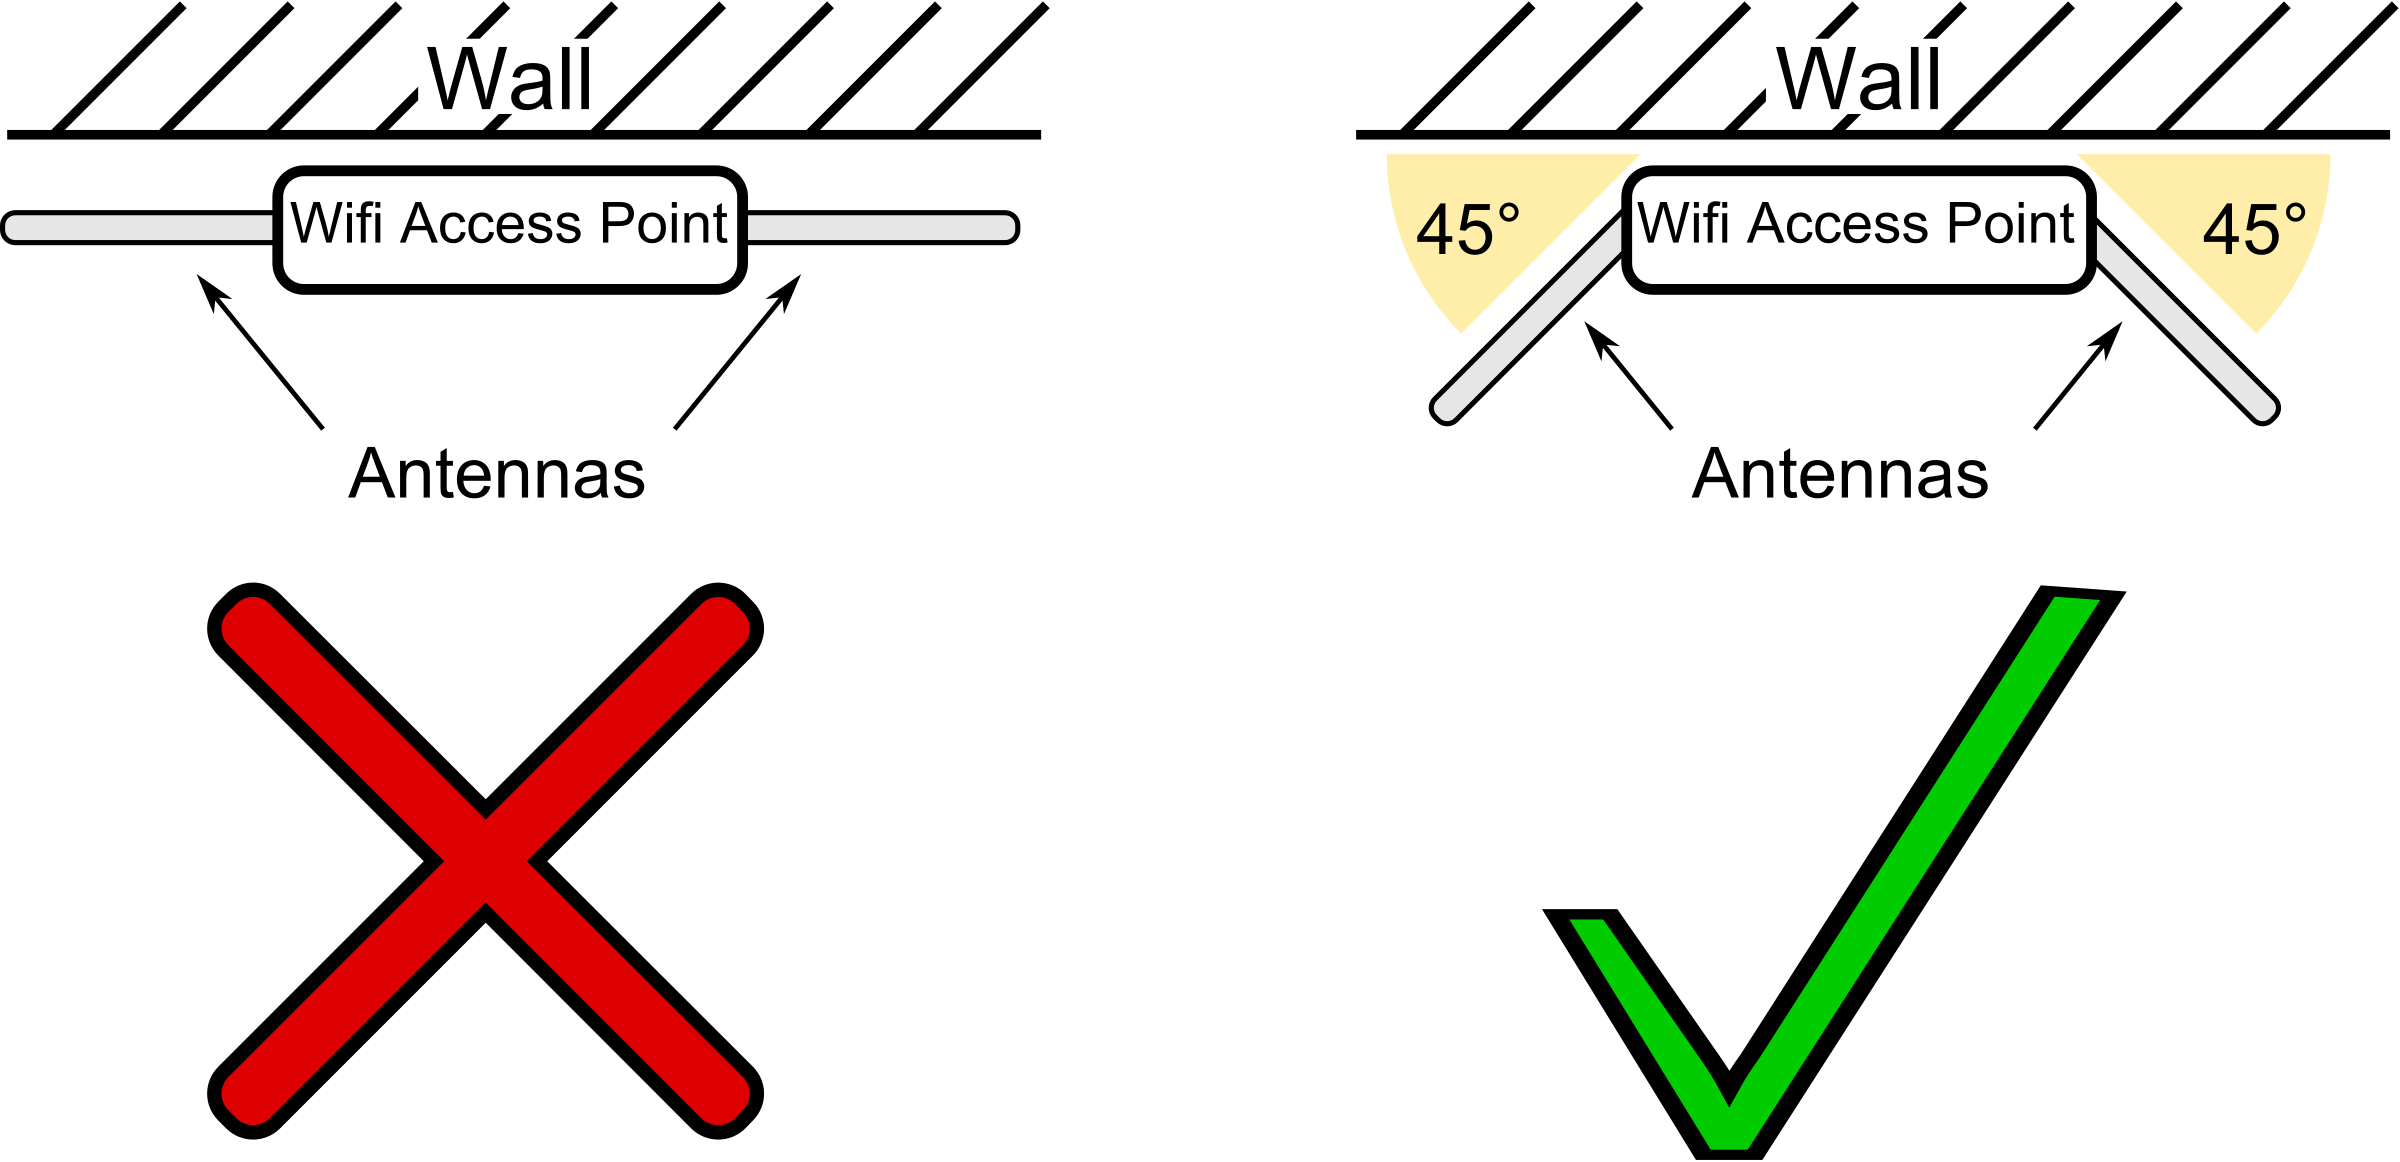 Wifi Access Point schema and antennas position SVG Clip arts